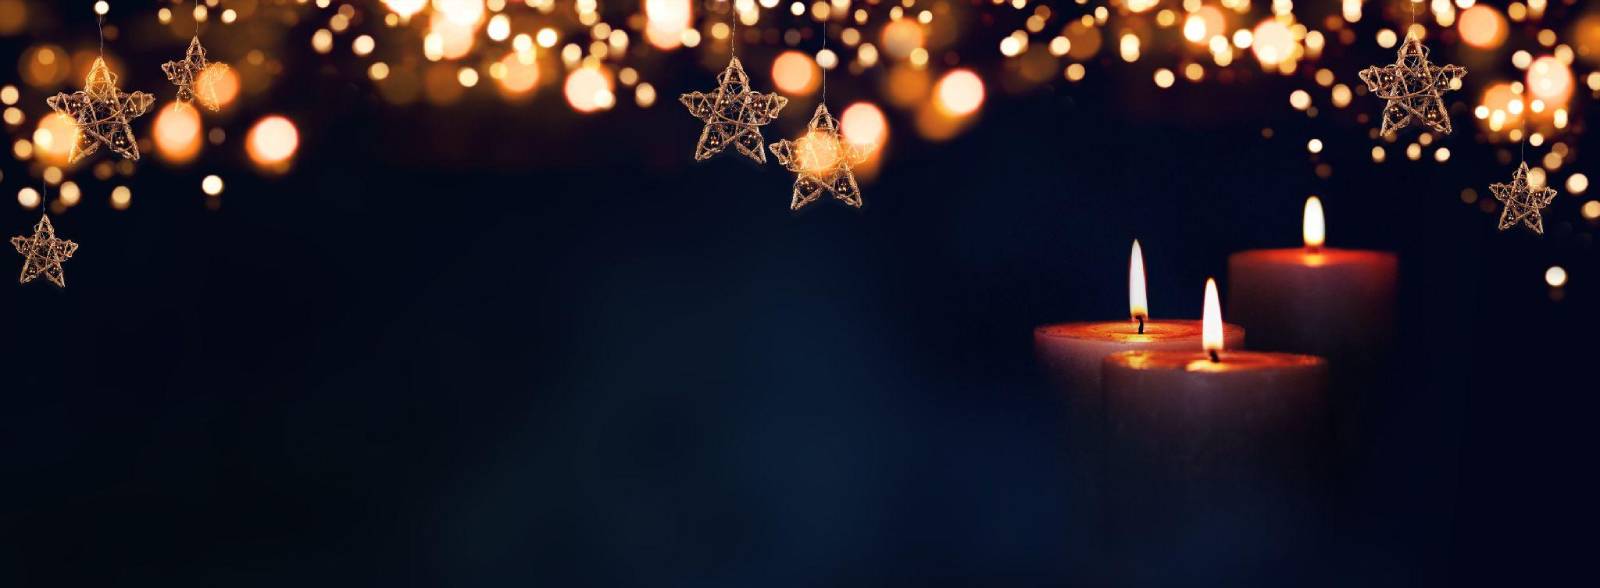 Stars, lights and candle for holiday celebrations